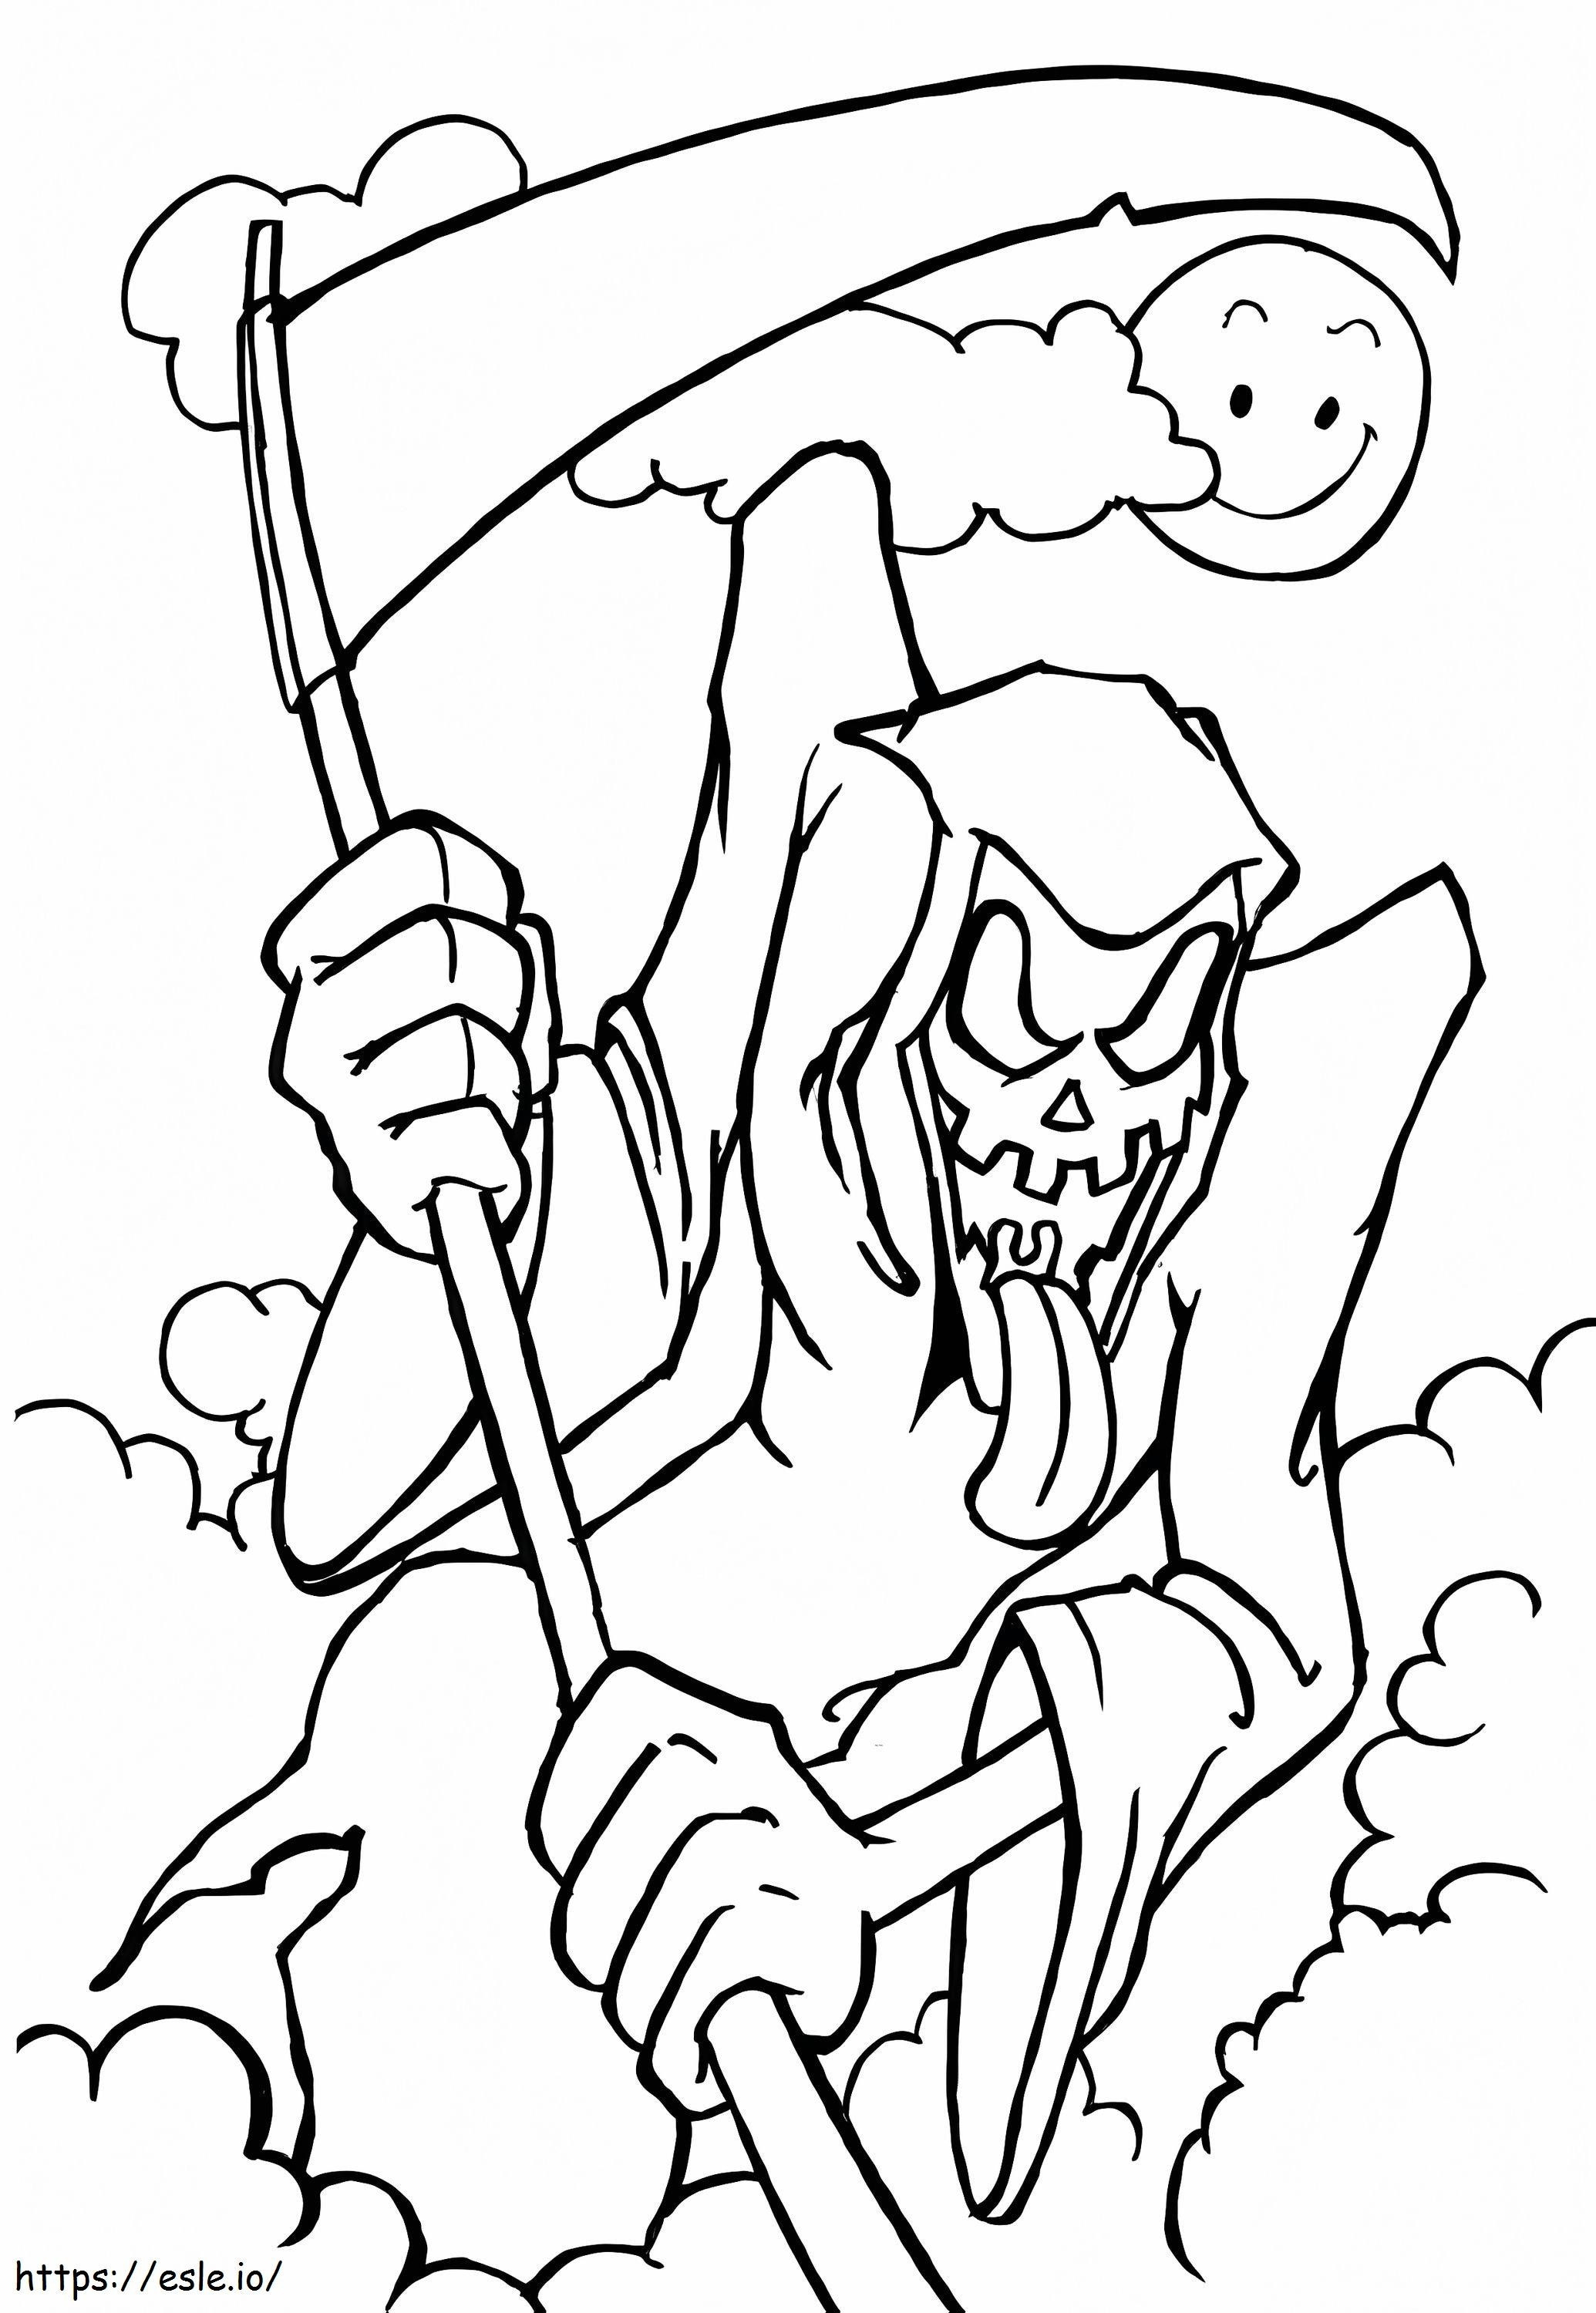 Horror Death coloring page